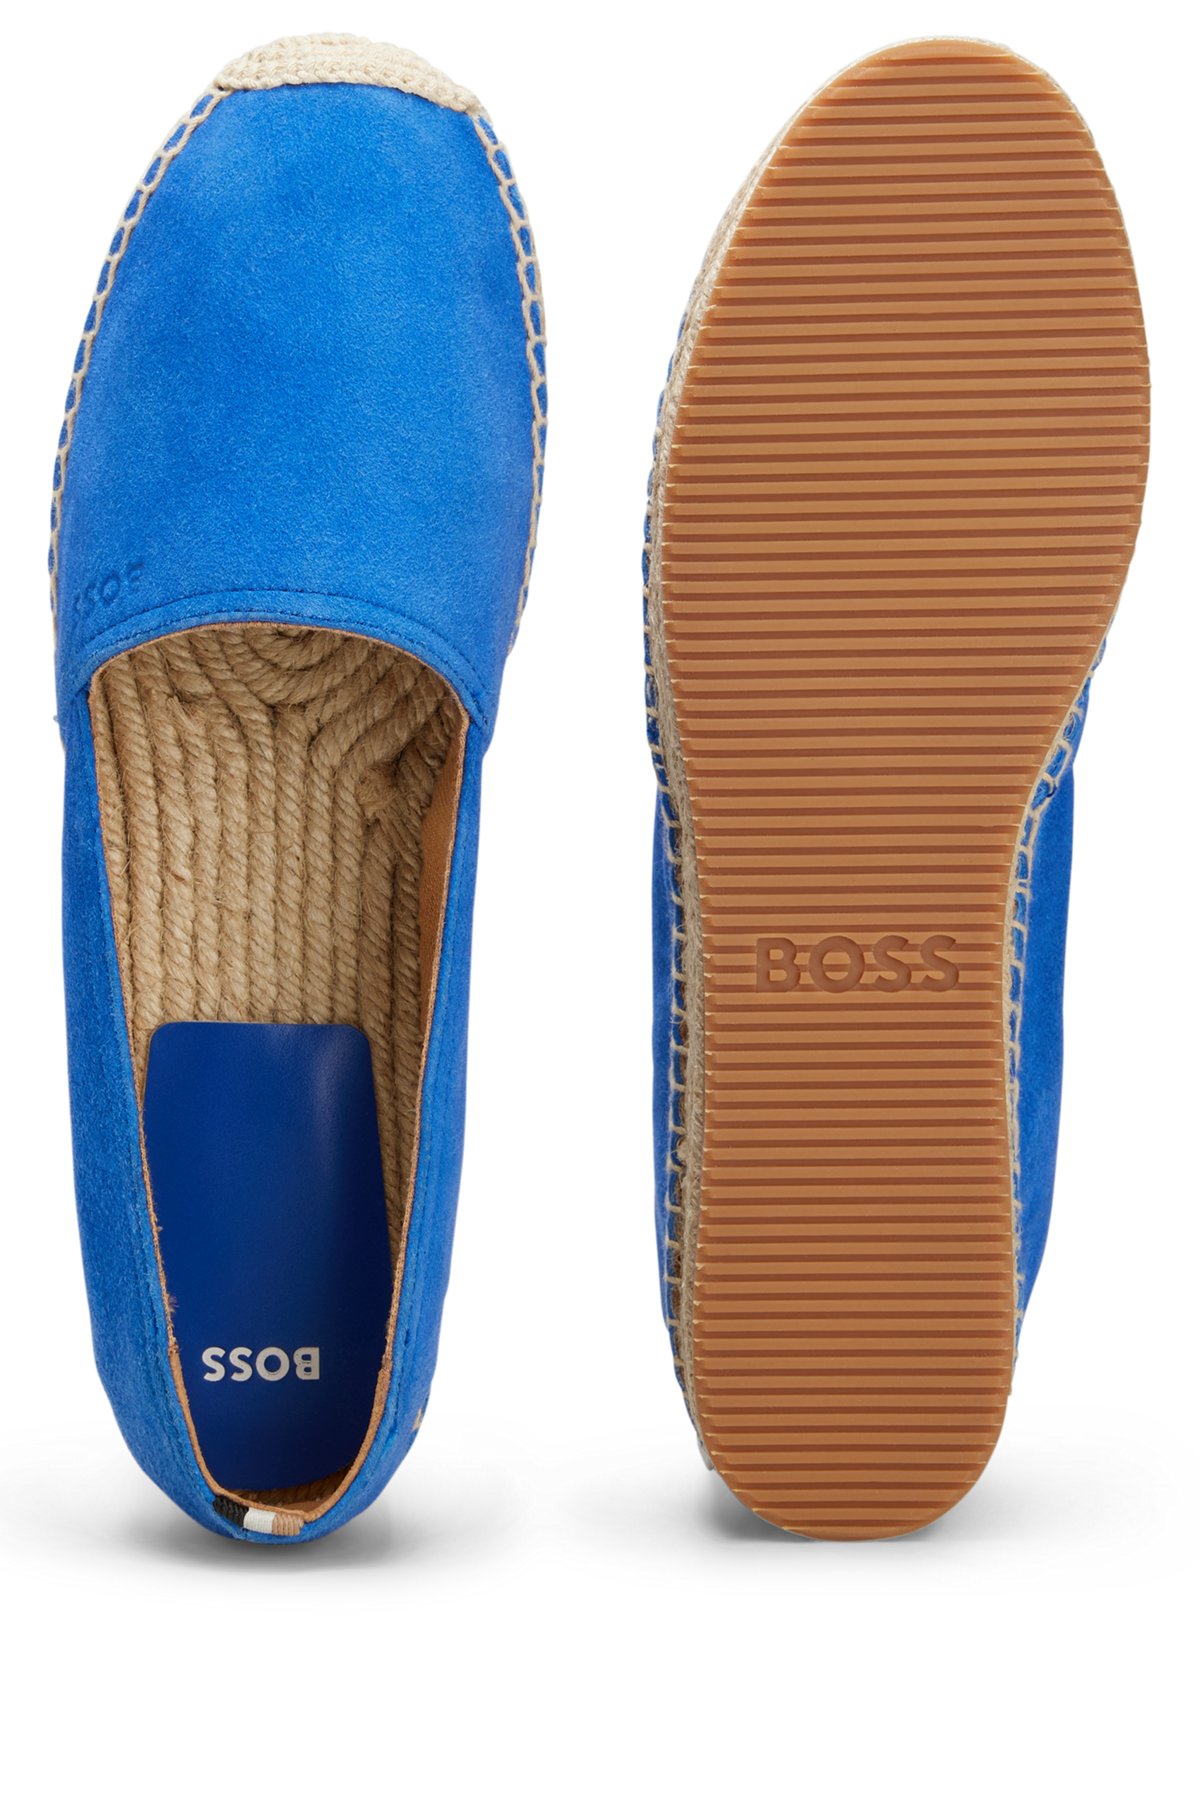 Goat-suede espadrilles with embossed logo and jute sole, Blue